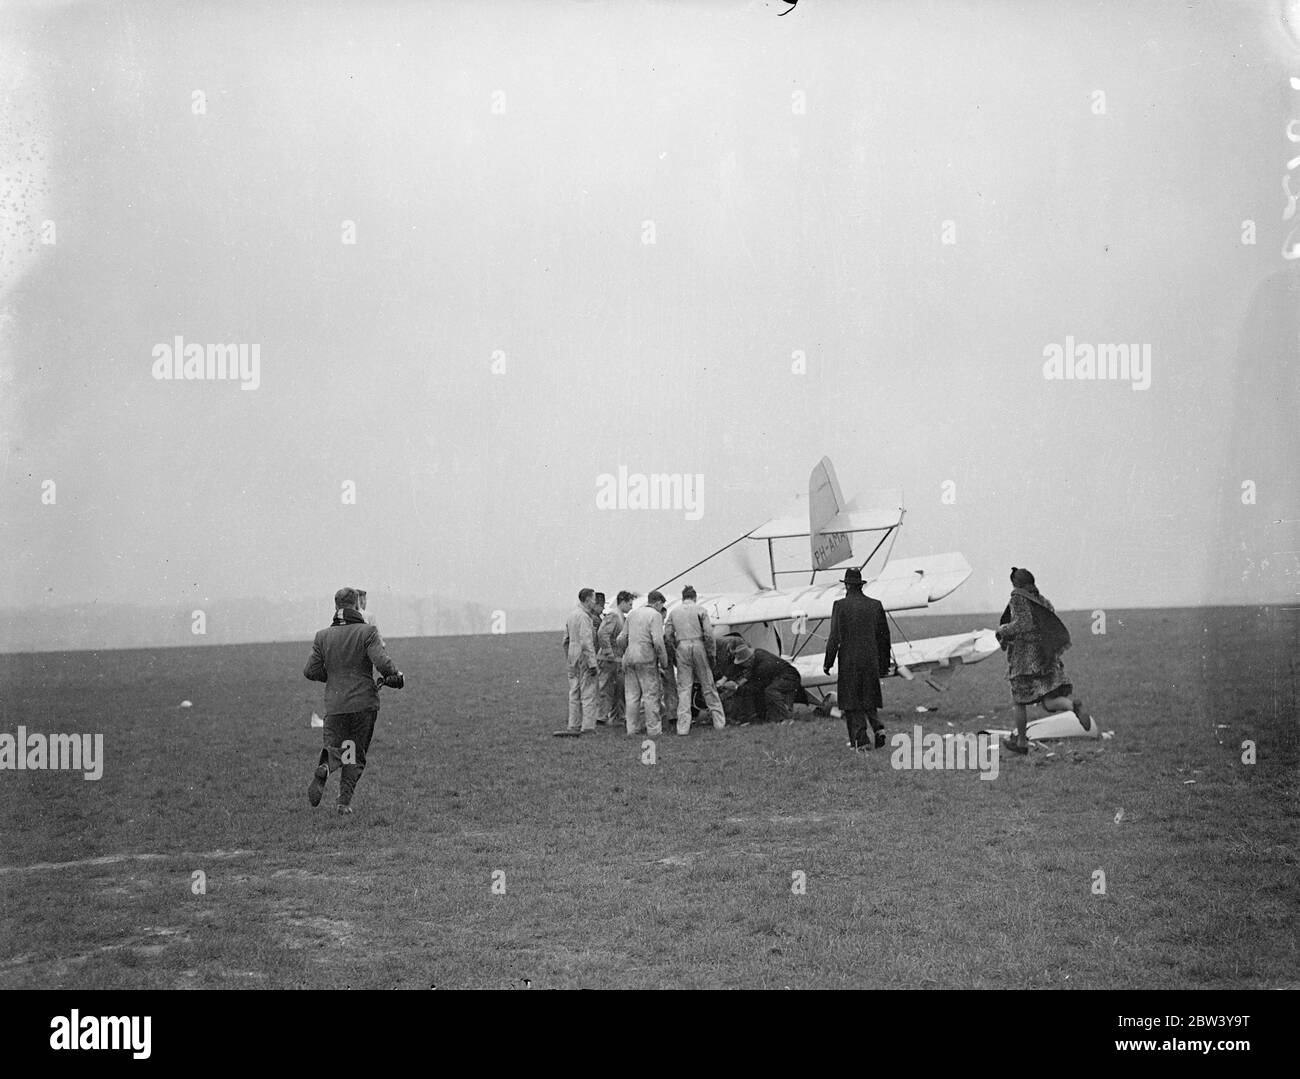 Fool-proof flights plane crashes at Gravesend Demonstration - pilot trapped in wreckage. The first demonstration in England of the Schelemusch, a Dutch light plane said to be full-proof, ended in a crash at Gravesend Aerodrome. The plane was piloted by Mr R. G. Doig who was injured. The machine was flying low and trying to make a sharp turn when it was caught by a gust of wind and completely wrecked. Mr Doig's leg was caught in the wreckage, the pilot having to wait until rescuers could extricate him. The Schelemusch [de Schelde Scheldemusch], a singles-seater, is fitted with a 40 horsepower t Stock Photo